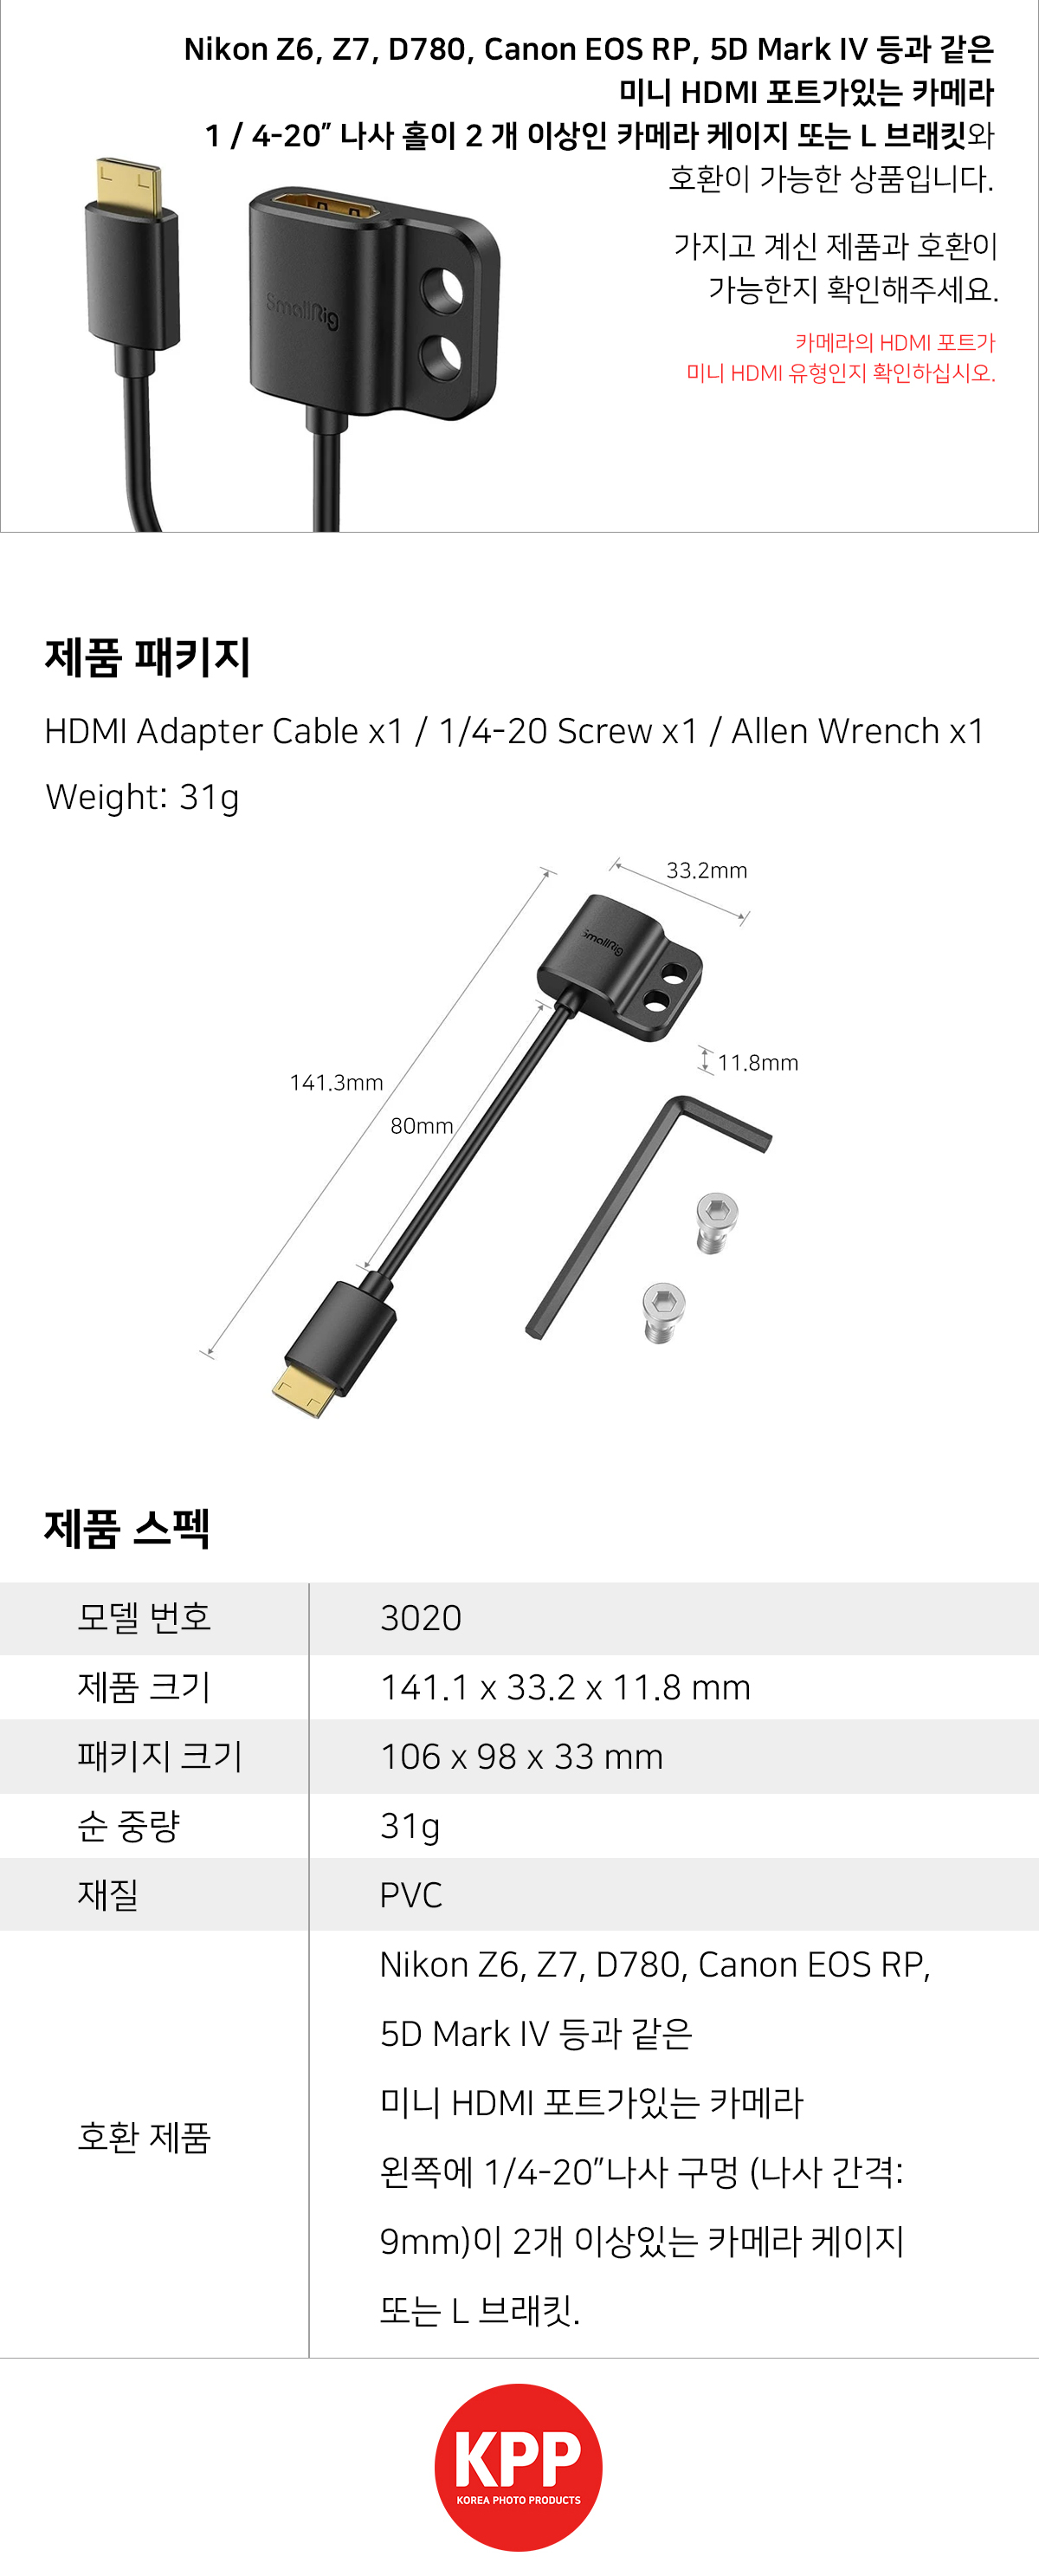 HDMI_Adapter_Cable-3020_02.jpg